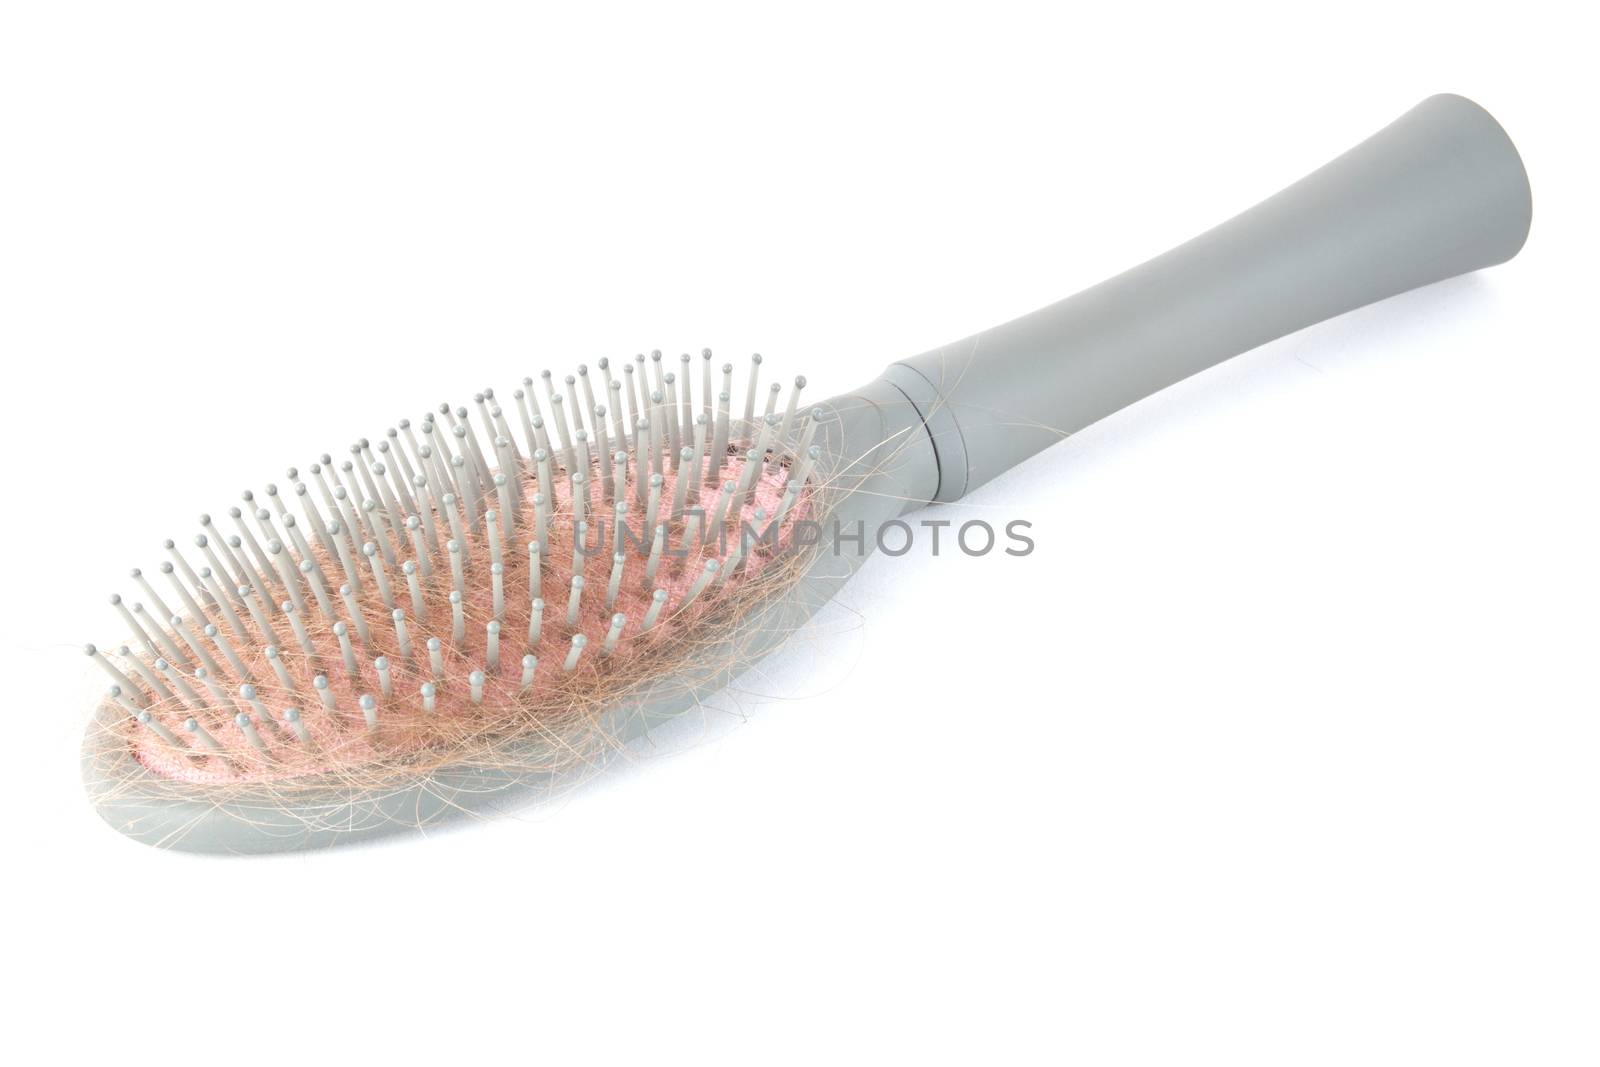 hairbrush with hair fall on white background by z1b